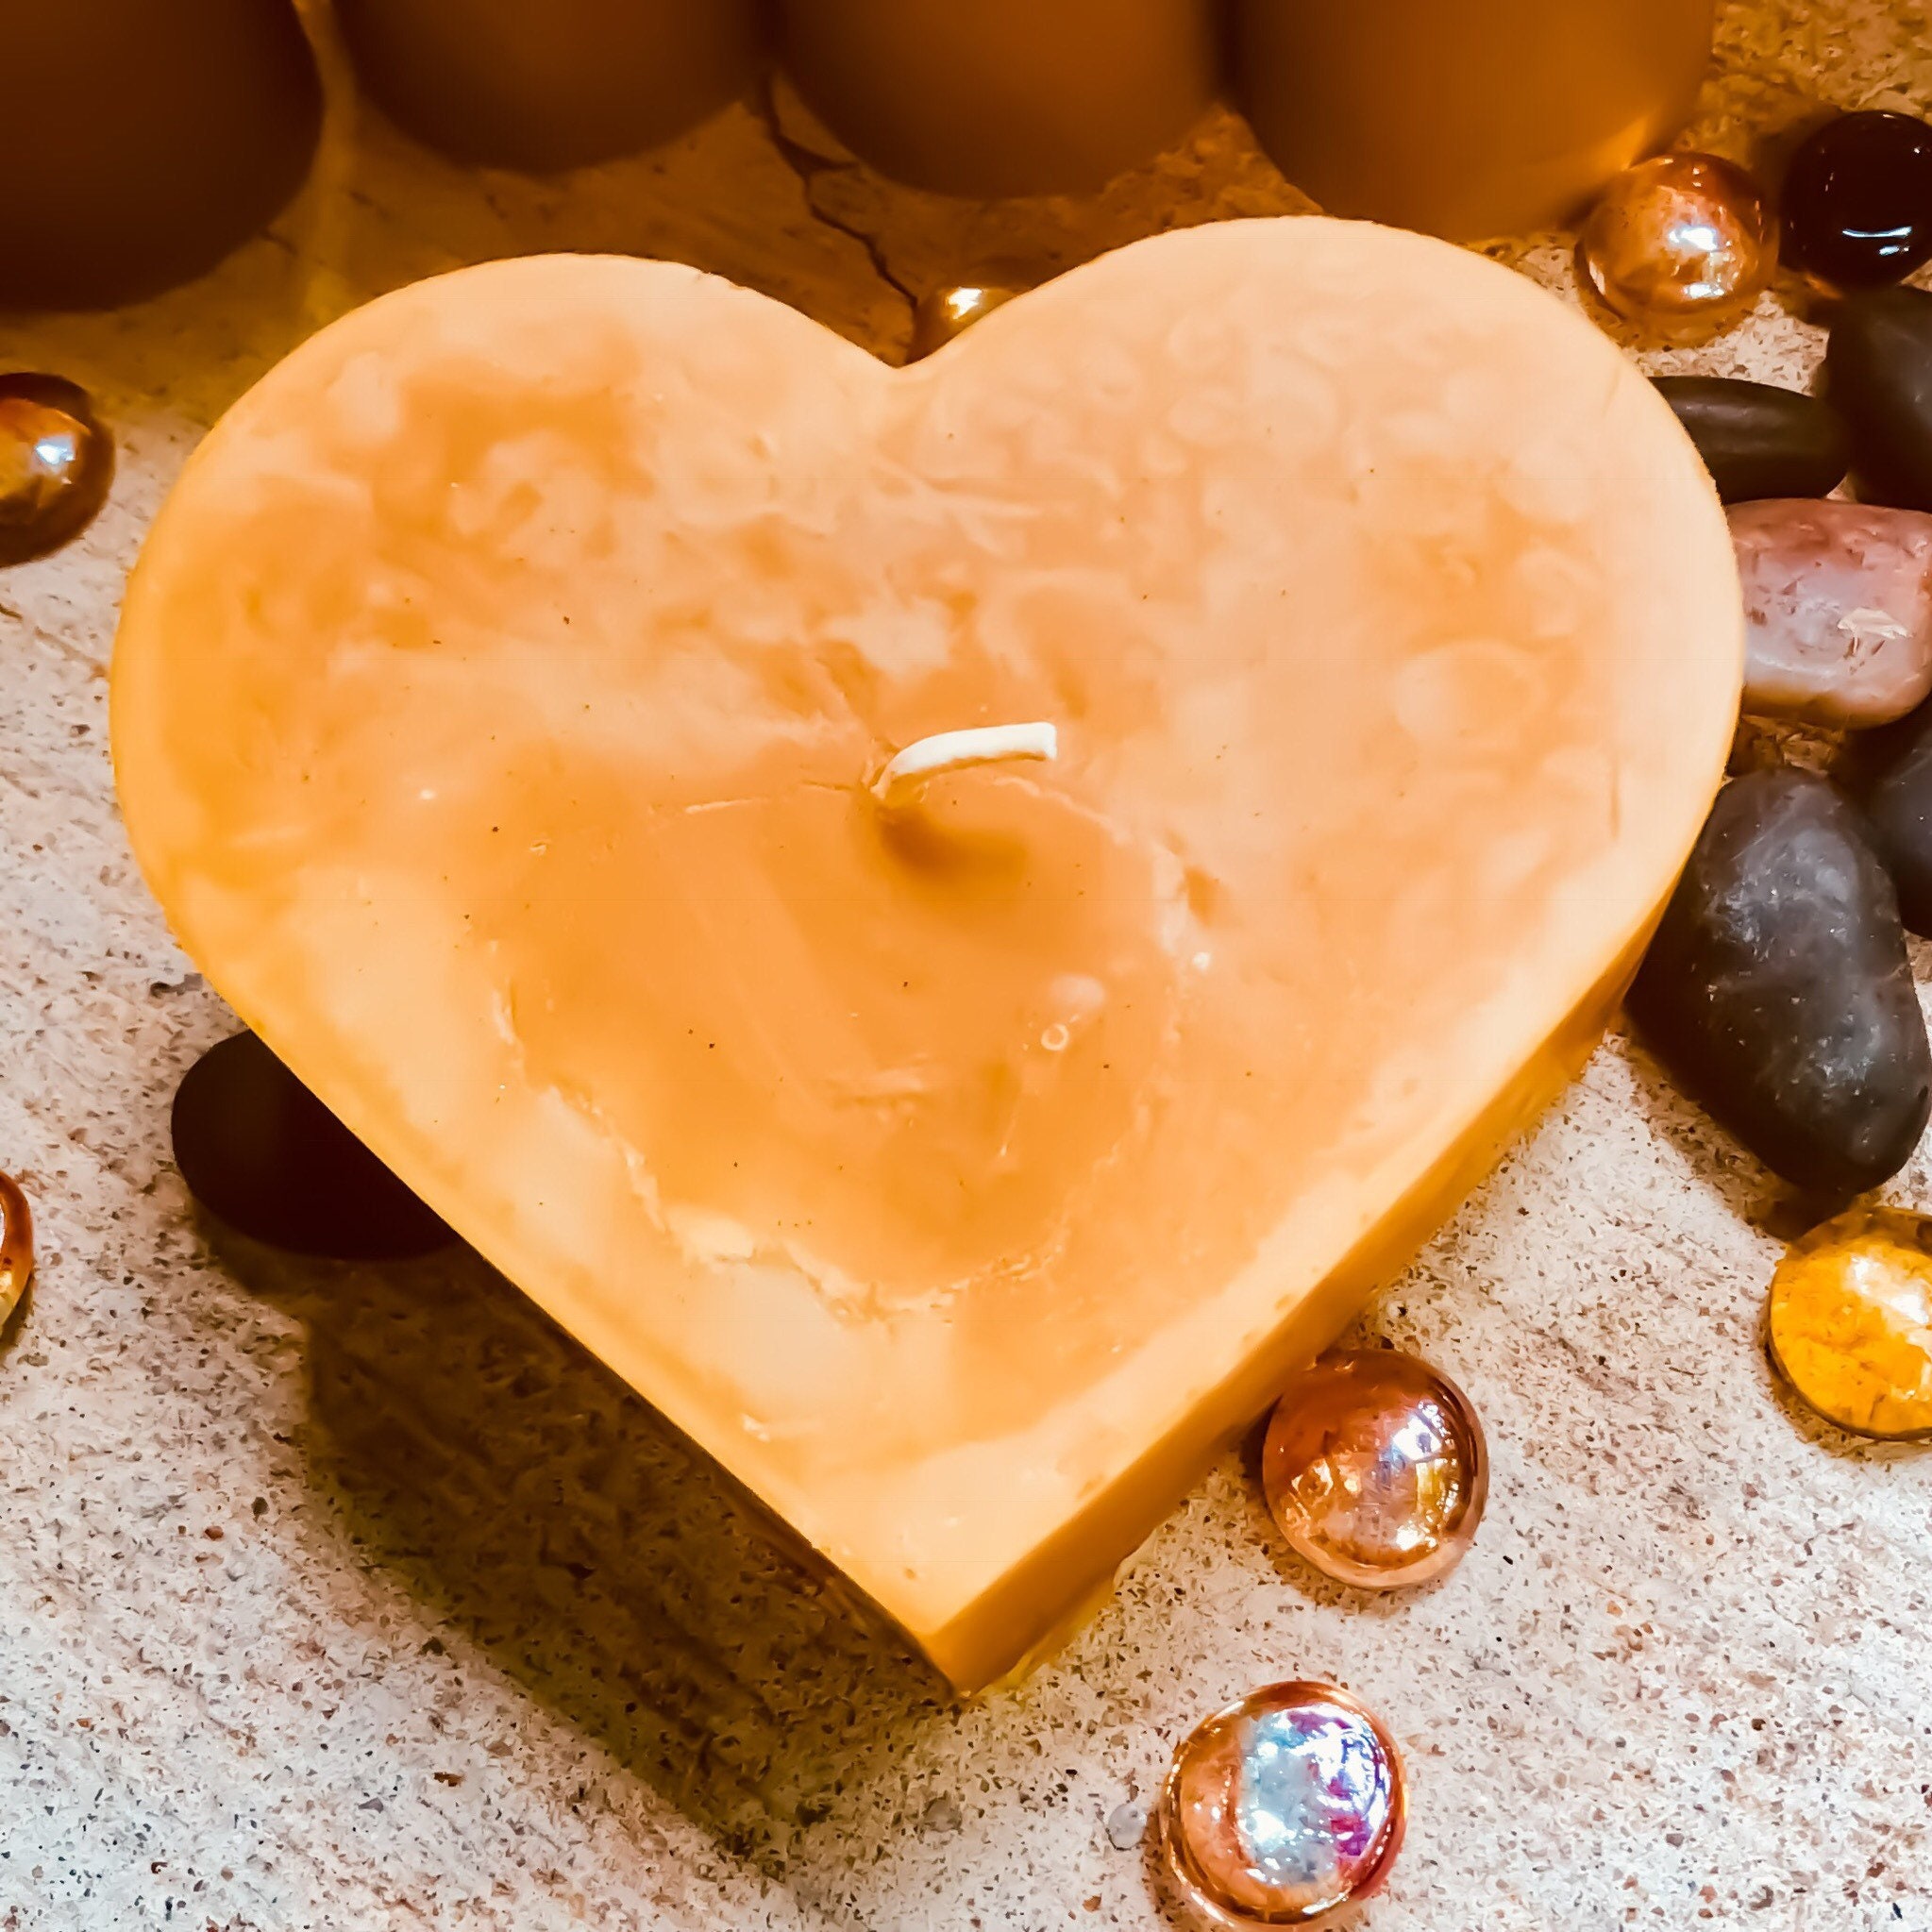 100% pure beeswax heart shaped candle-large 4 heart candle-unique heart  beeswax candles-organic beeswax